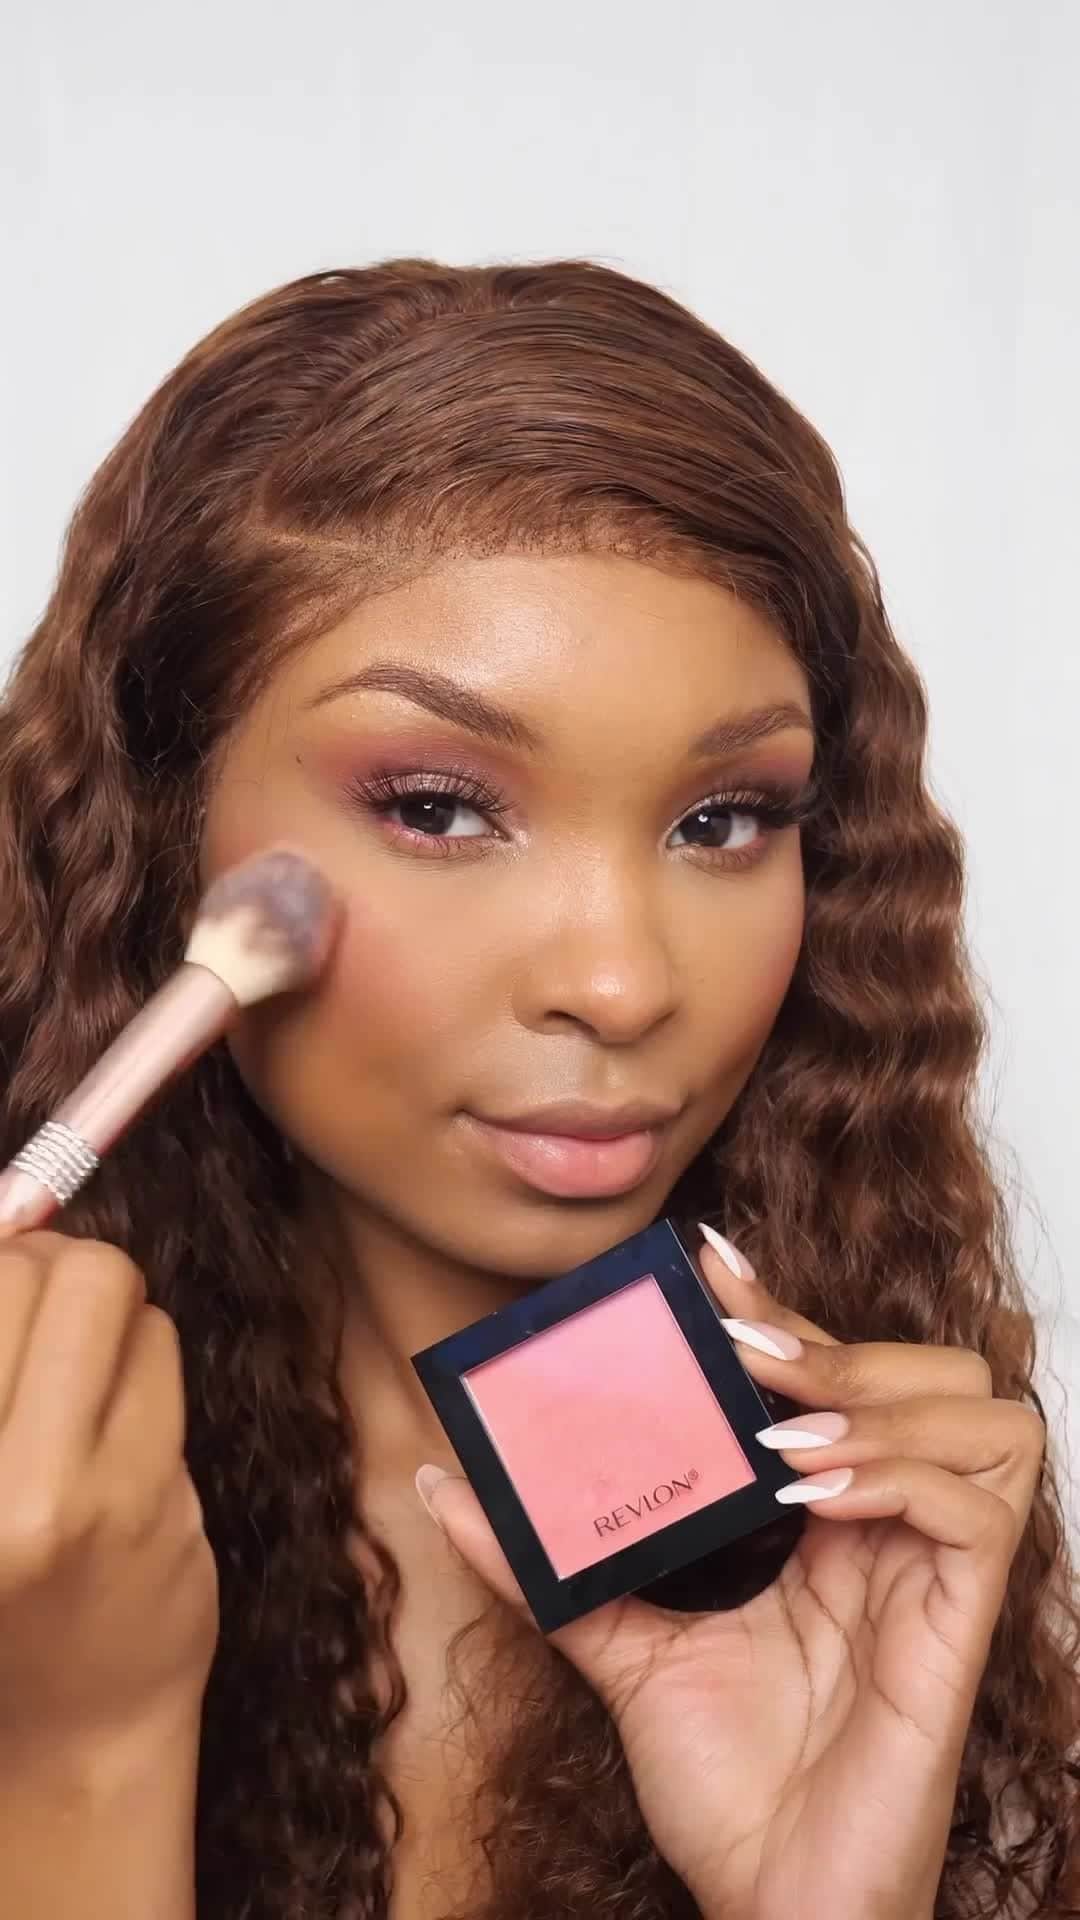 Revlonのインスタグラム：「Category is: dewy skin + peachy pink eyes & lips 🍑✨  @gxldenmya slays this beat using: #RevlonIlluminance Skin Caring Foundation #ColorStay Skin Awaken Concealer #ColorStay Day to Night Eye Quad in Pretty #Revlon Powder Blush in Just Peachy #SuperLustrous The Gloss in Rose Quartz & Snow Pink」